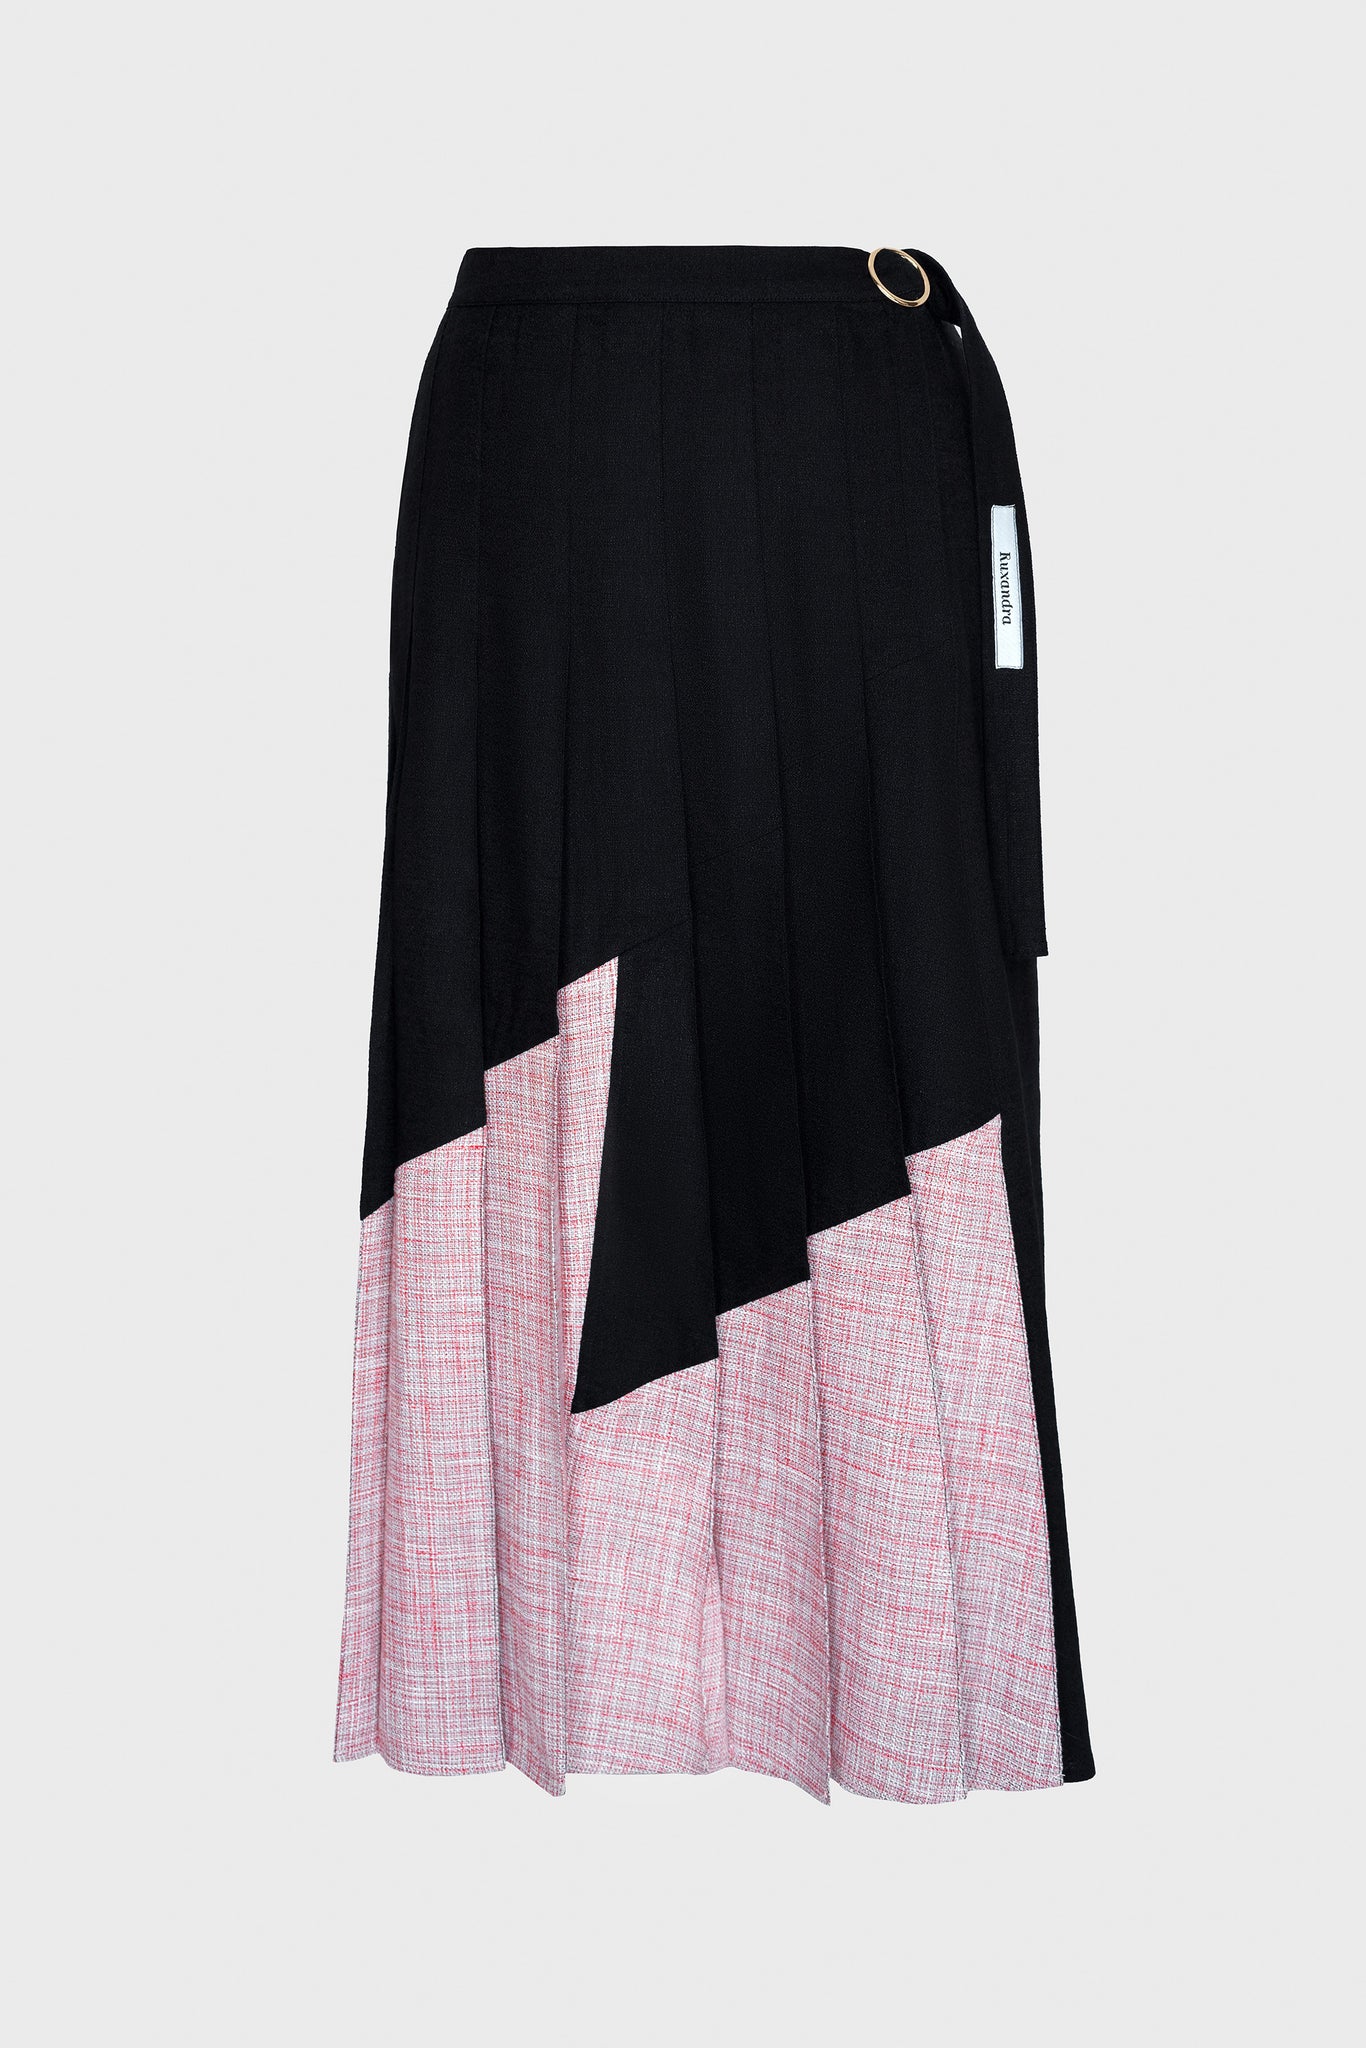 pleated skirt, midi length, crafted in Italian wool, waist band tied on the side, two tone, black and pink, asymmetrical, Spanish style